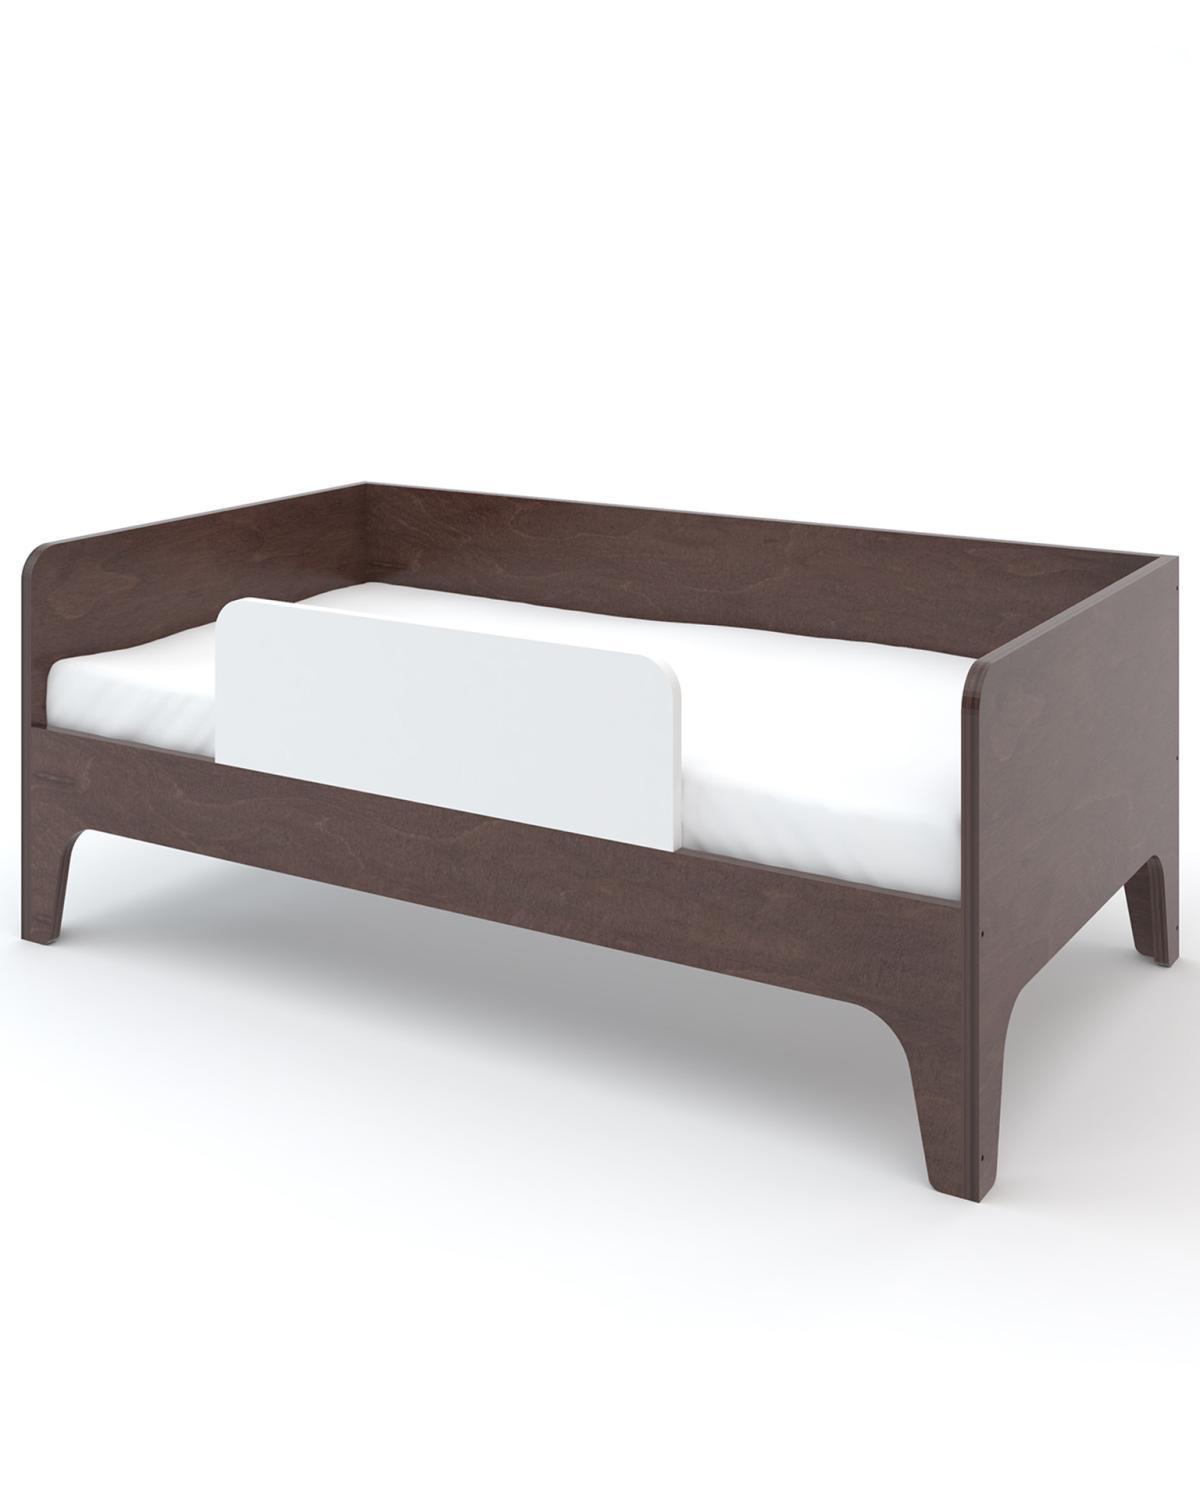 Little oeuf room perch toddler bed in walnut